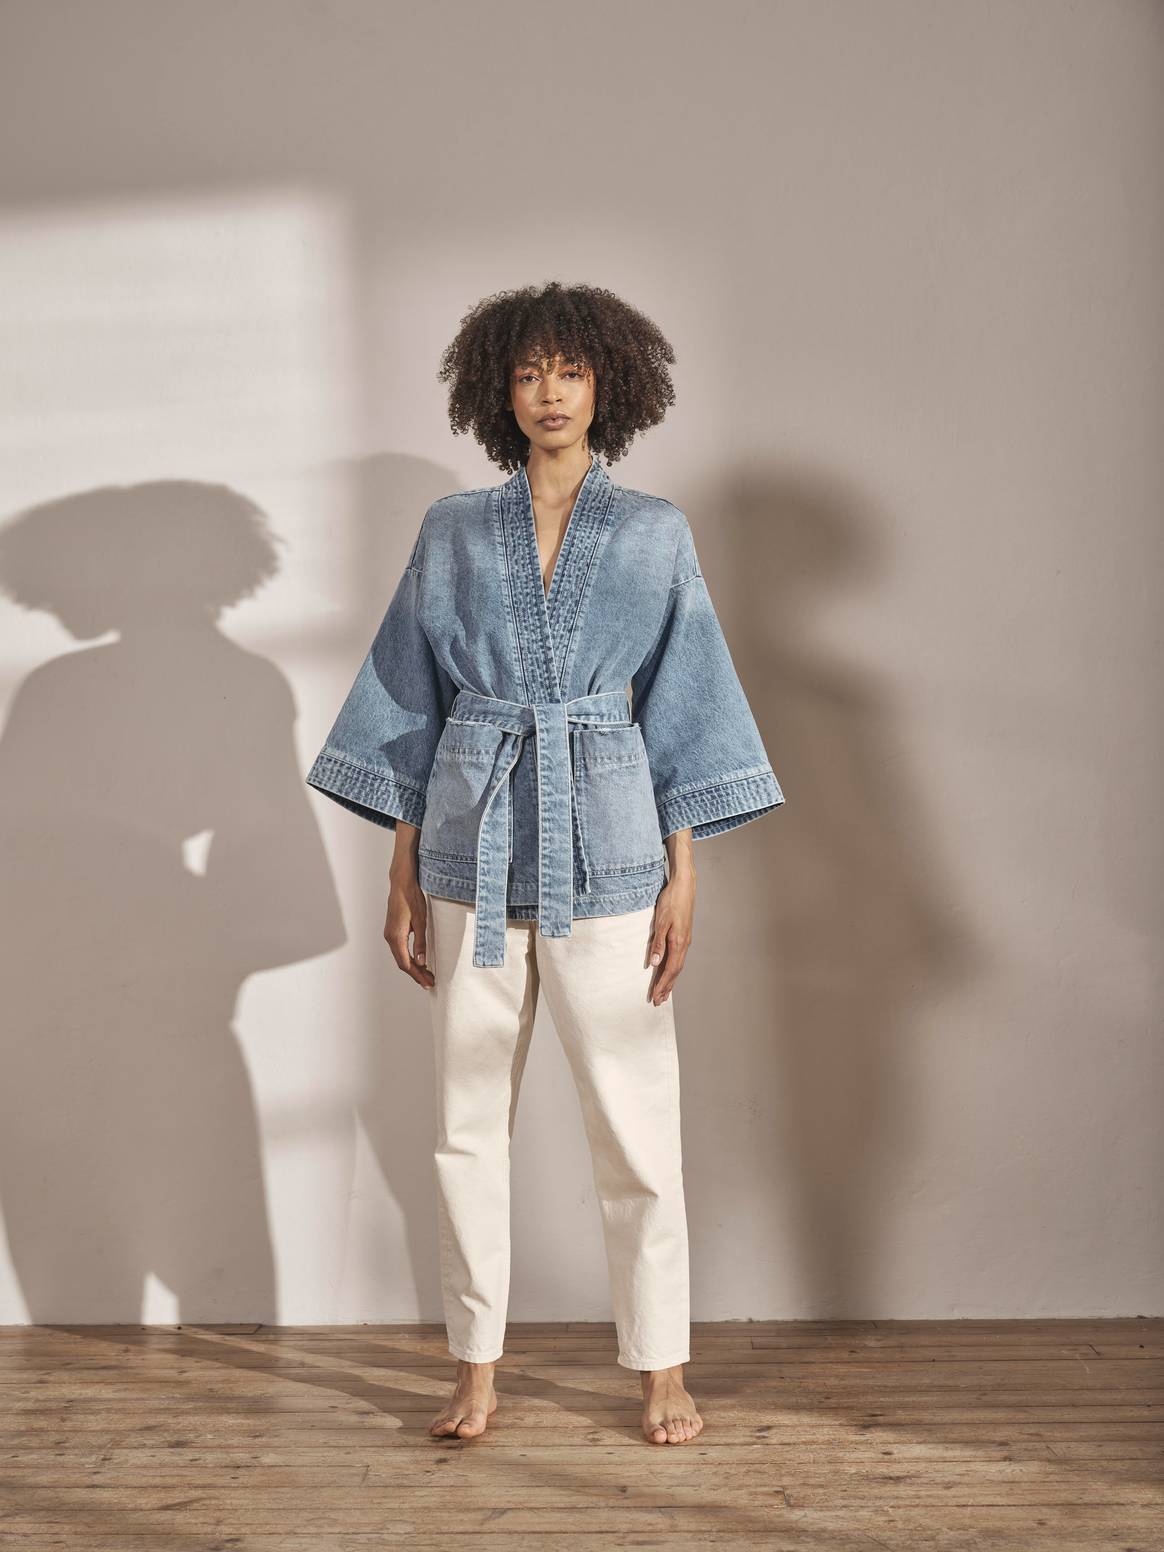 Mustang SS23 Womenswear Collection, courtesy of the brand